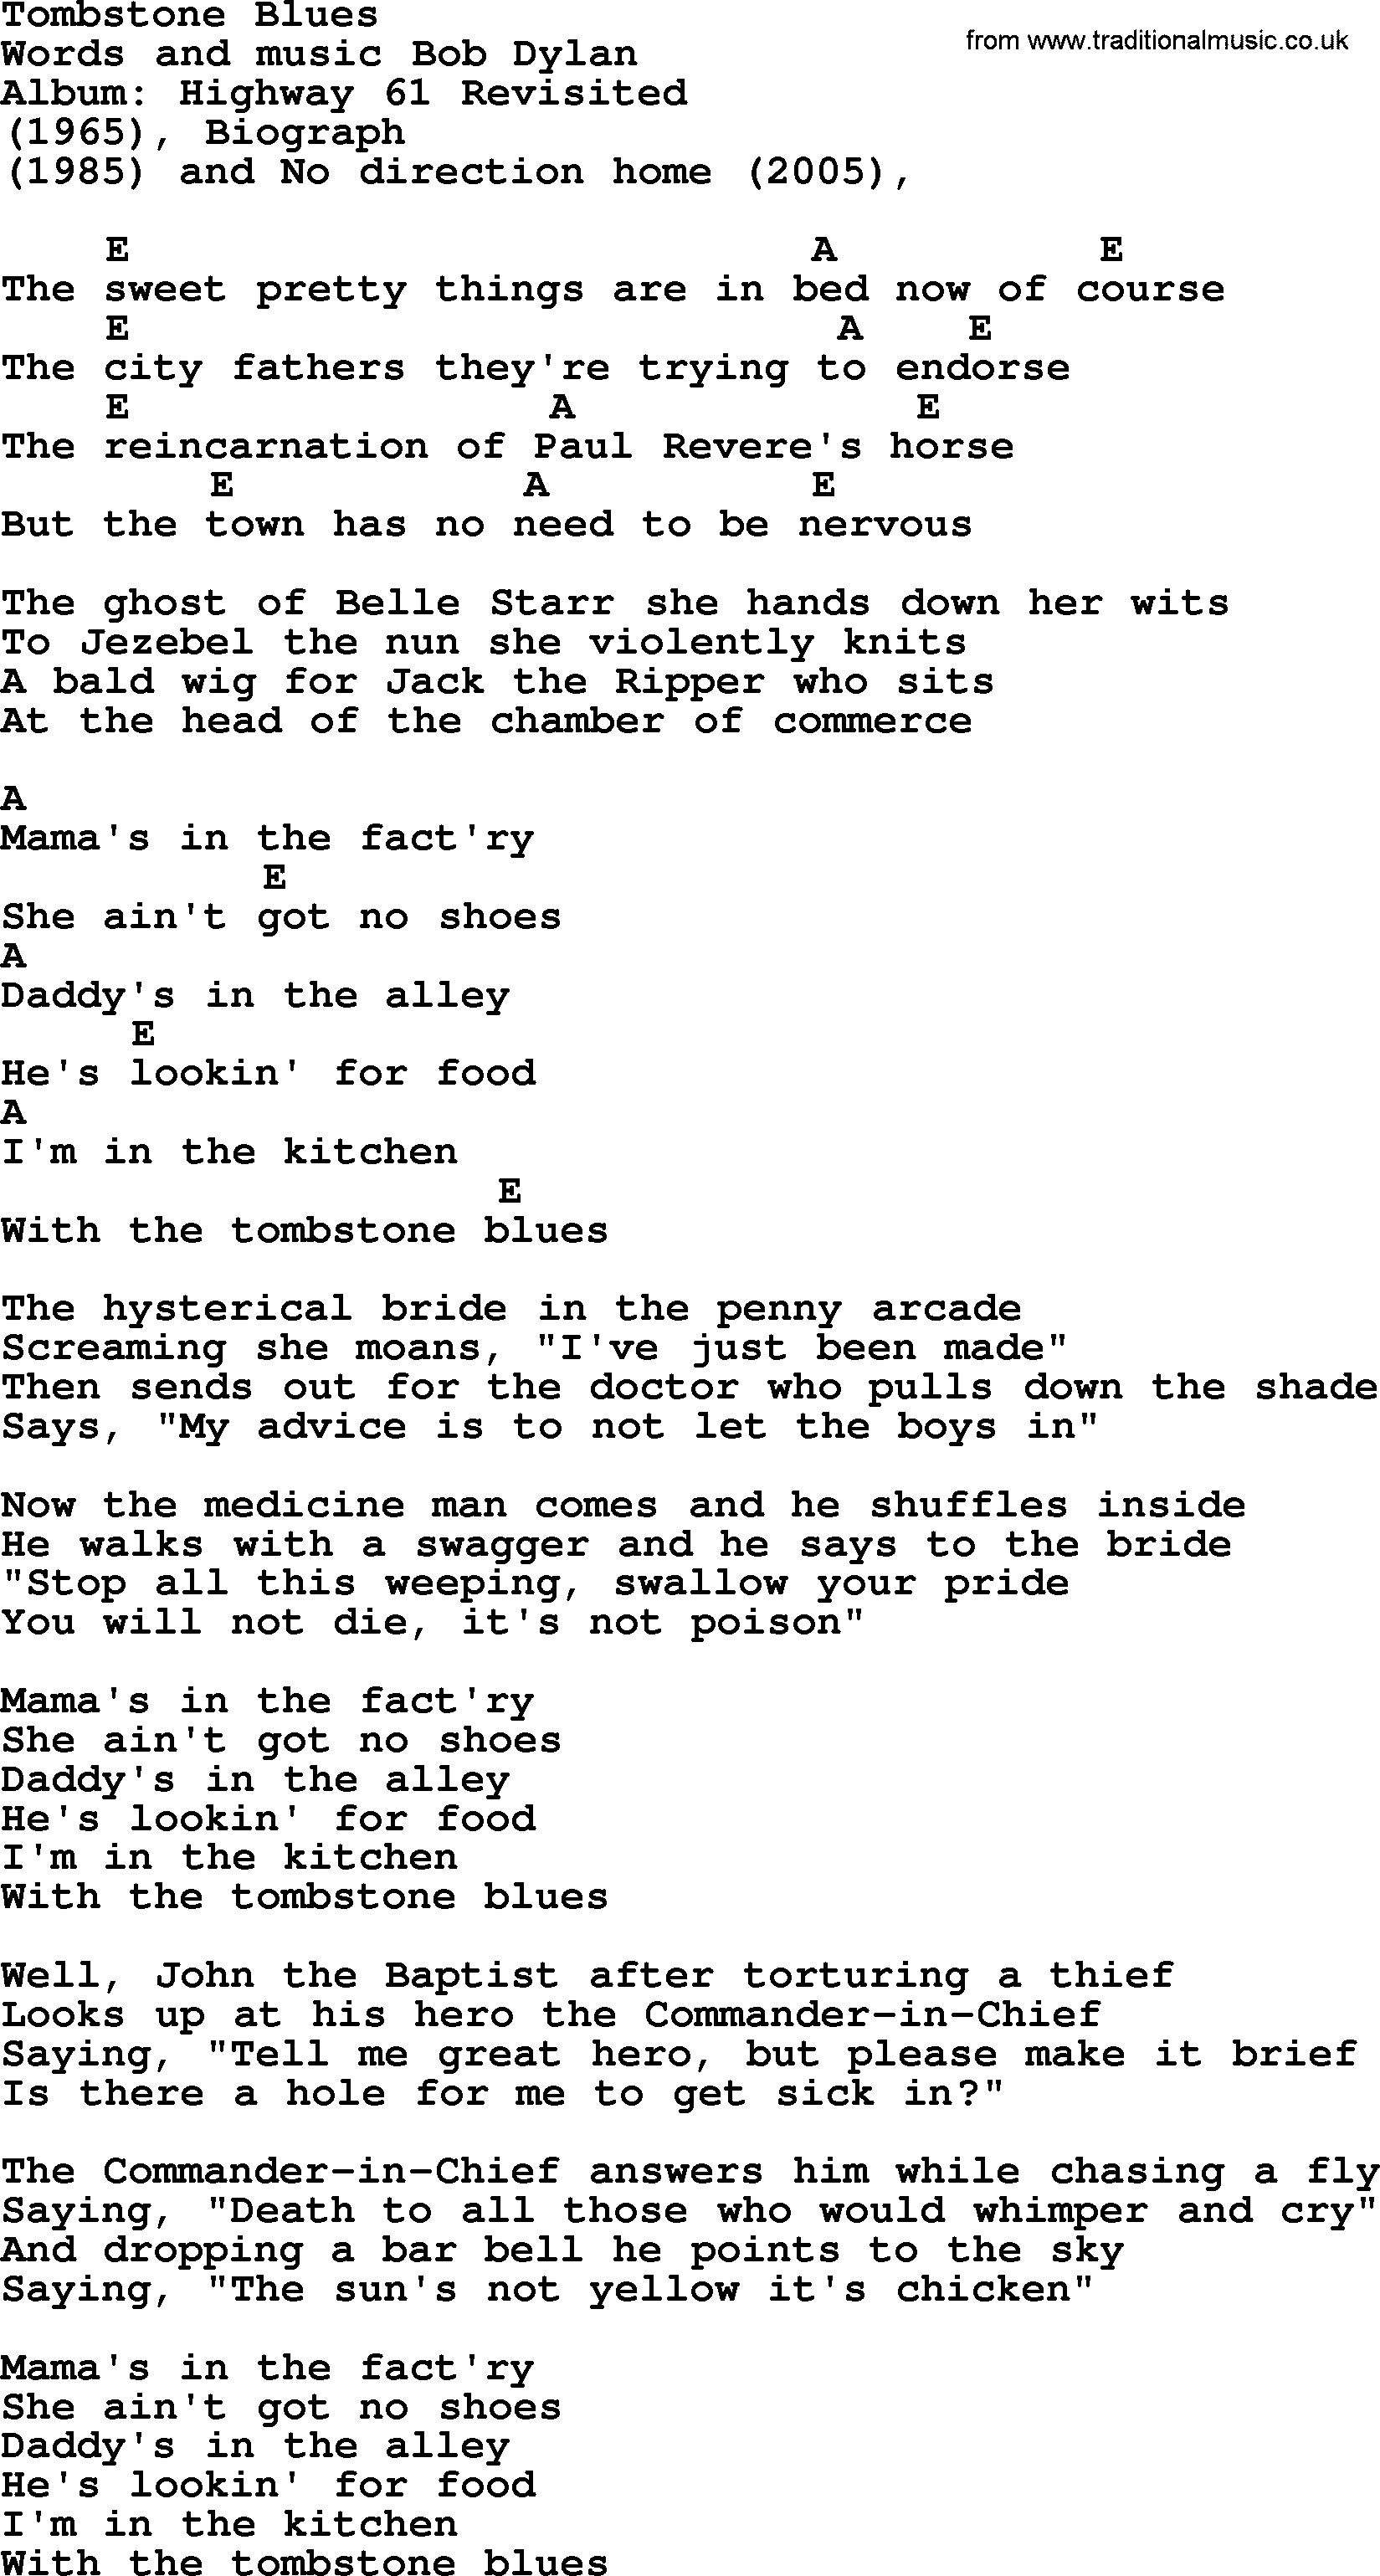 Bob Dylan song, lyrics with chords - Tombstone Blues